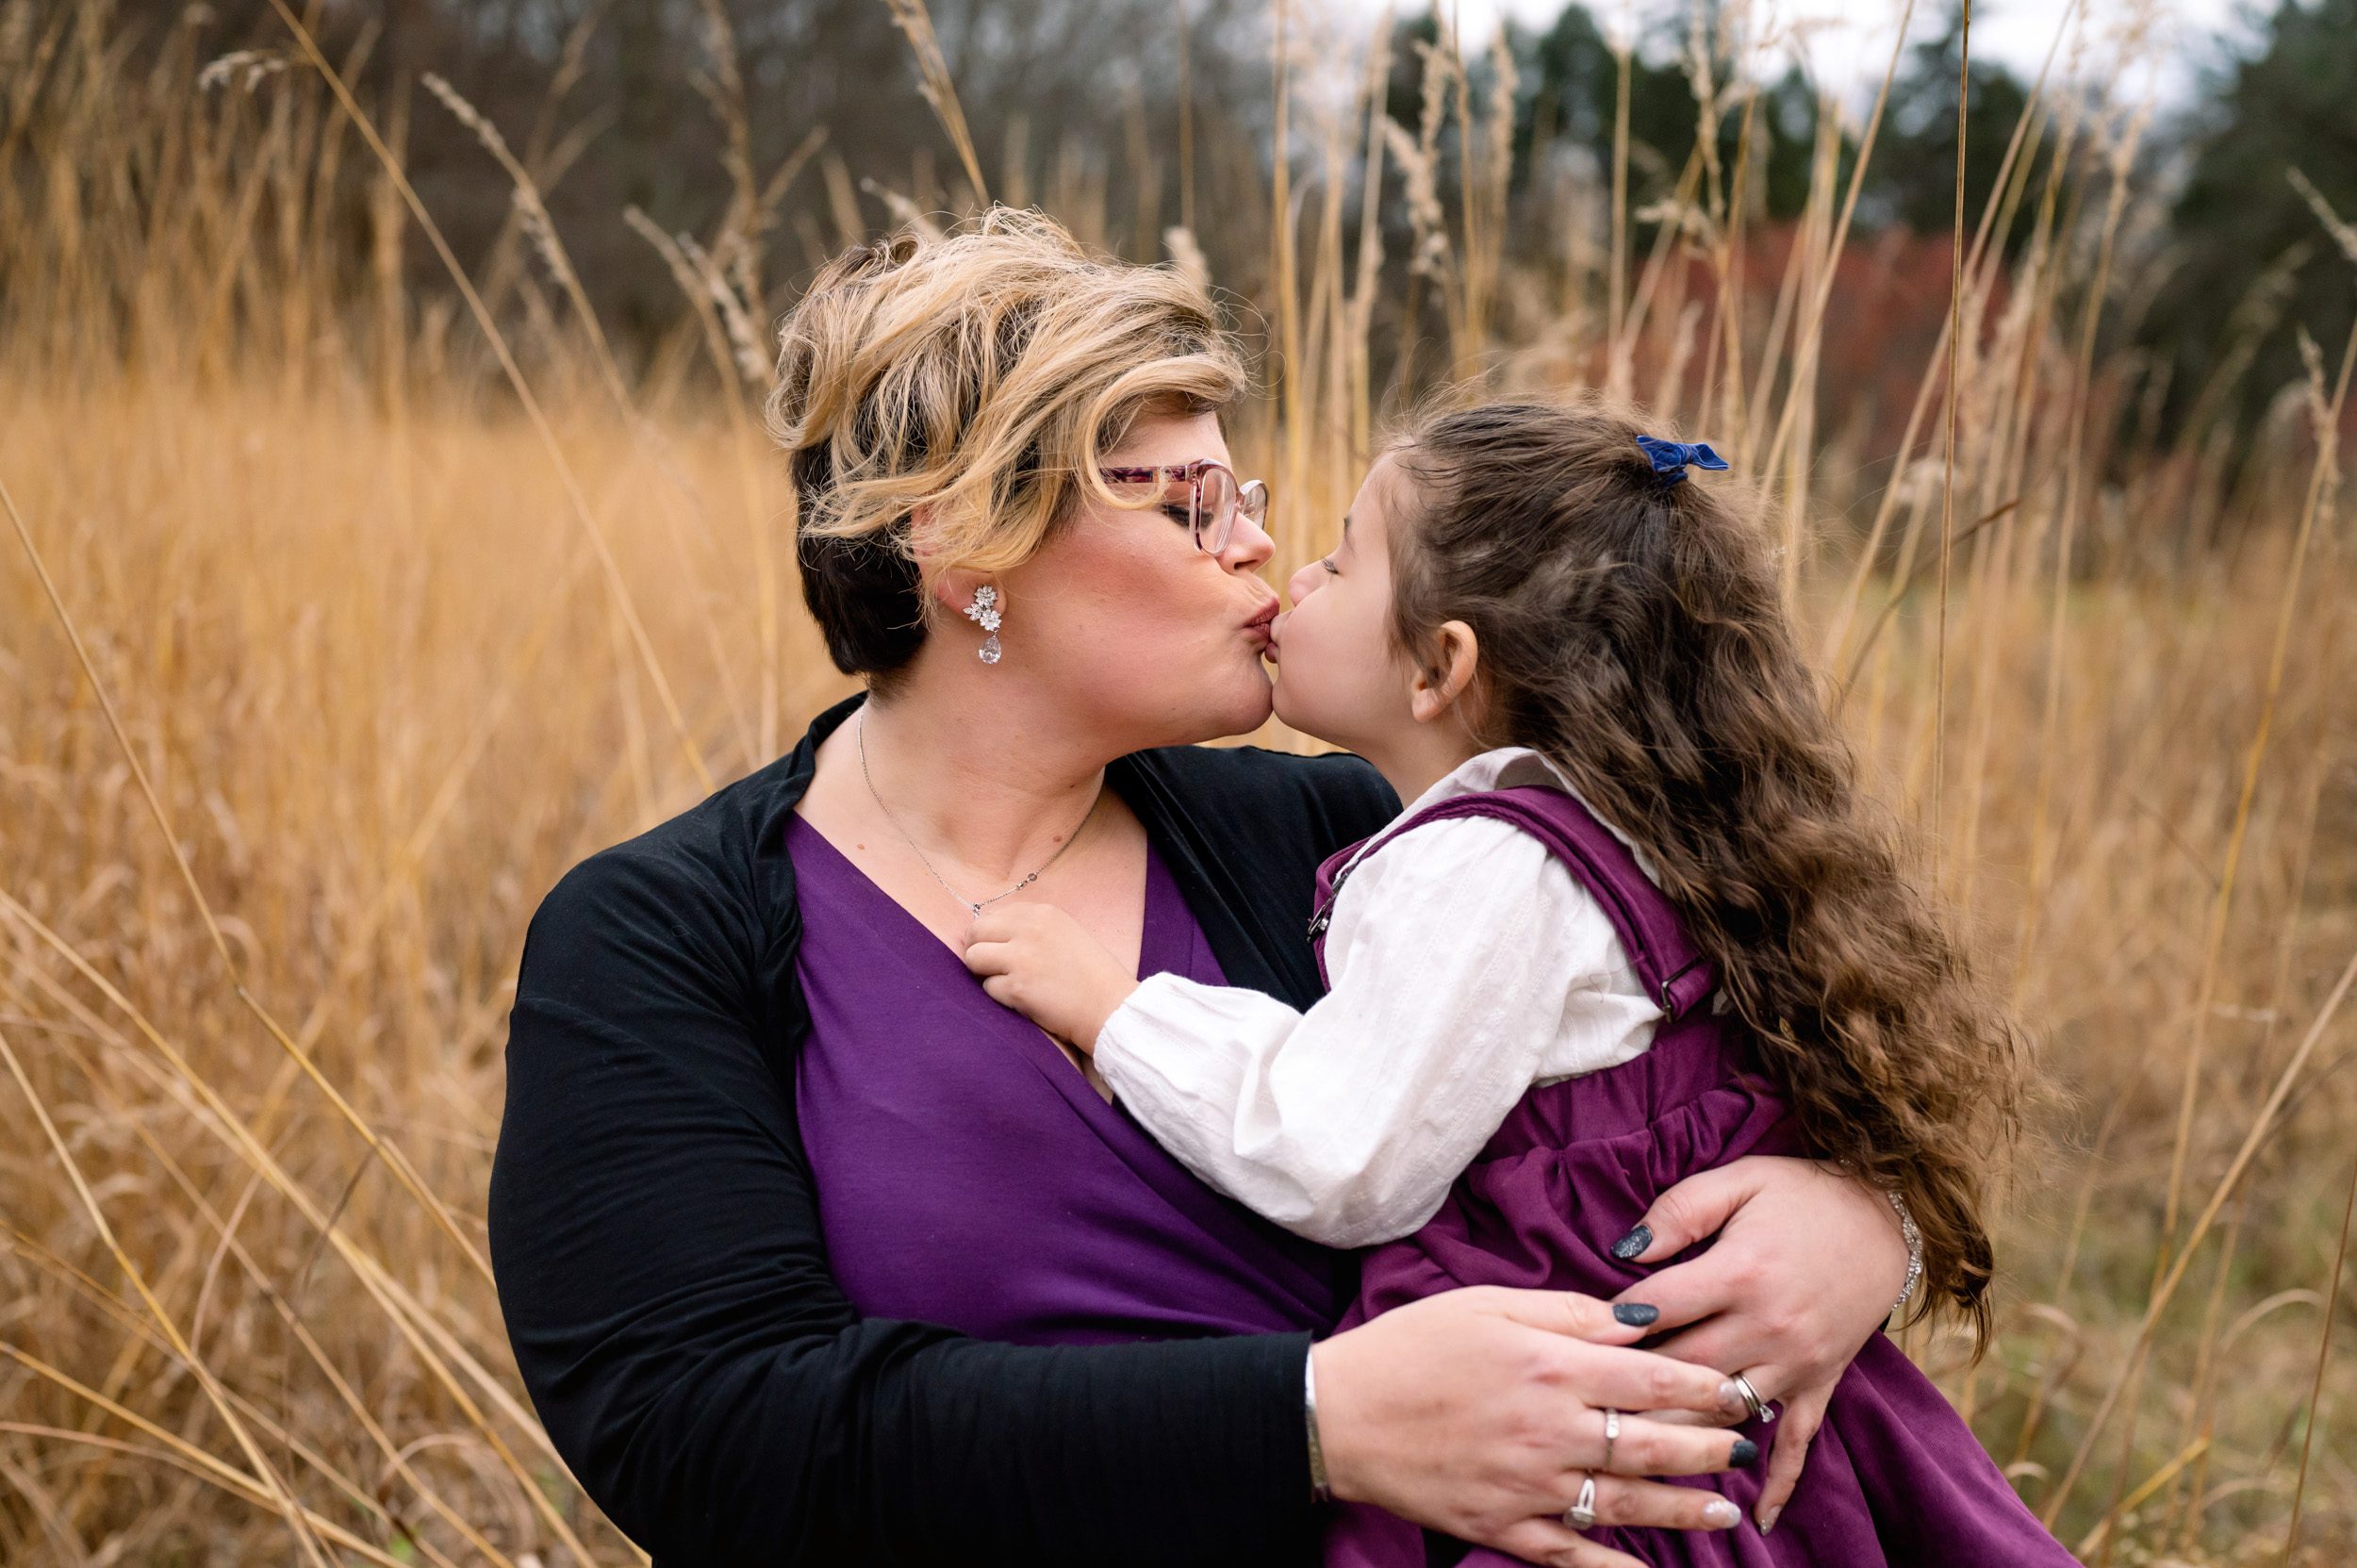 An aunt giving her niece a kiss in a field of golden grasses during an extended family photo session